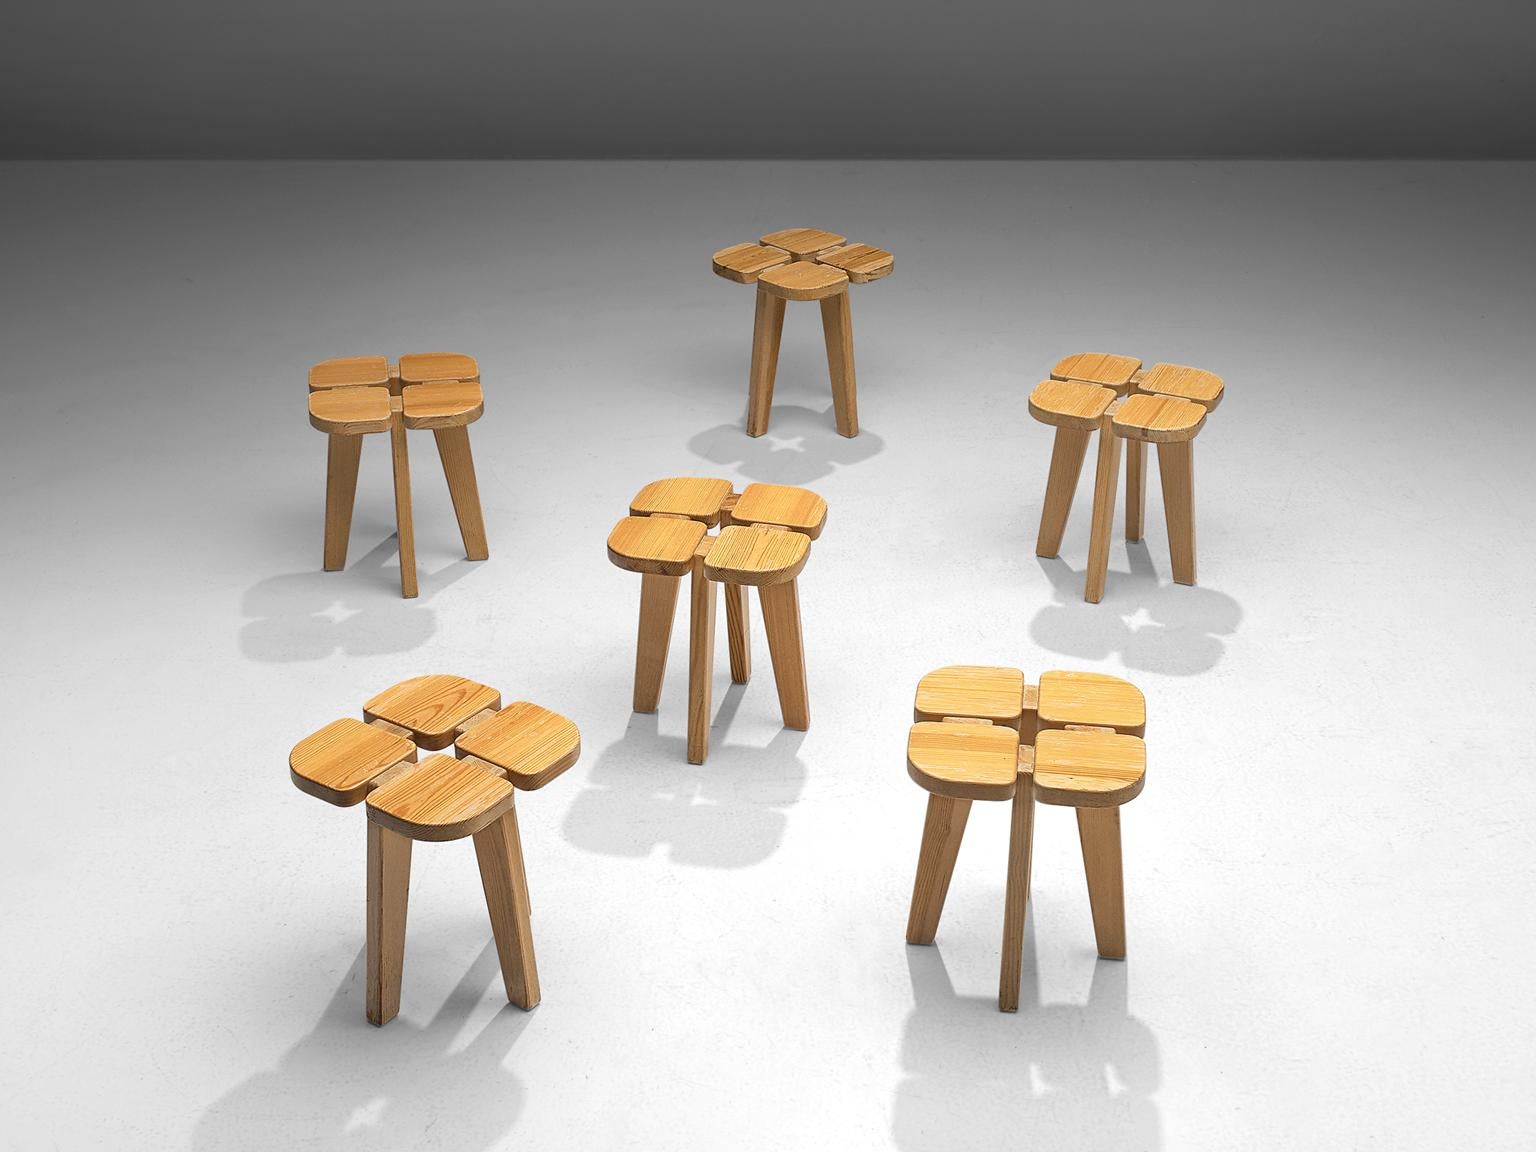 Lisa Johansson-Pape for Stockman Orno, set of 6 'Apila' stools, pine, Finland, 1960s. 

Set of 6 stools in solid pine. The design is simplistic: A clover top with four sloping legs. The construction of the stools is nicely visible on the top. Very